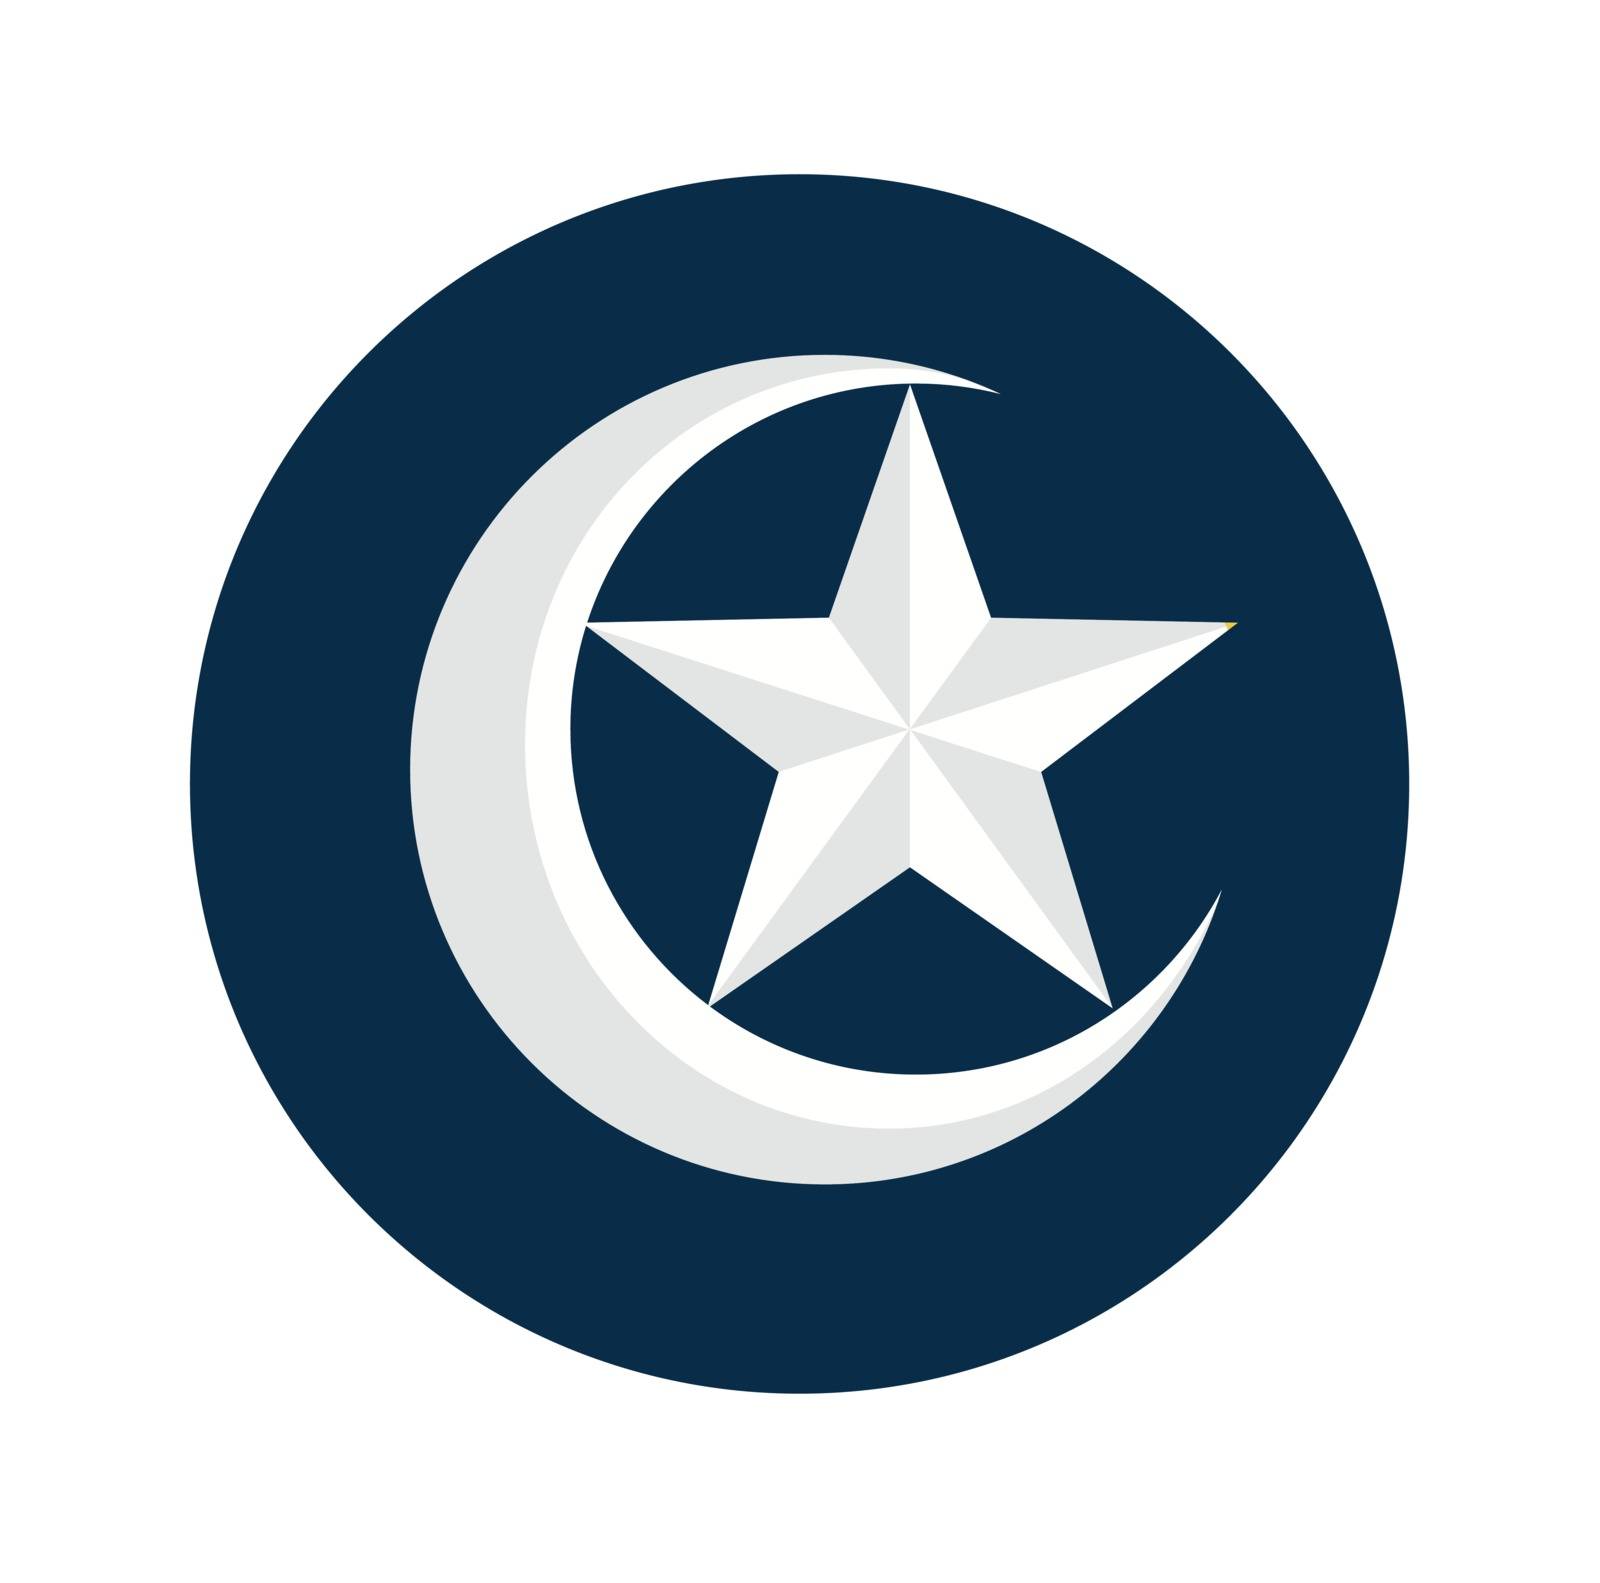 Islamic Flat Icon, Crescent star icon-Vector Flat Design  by solargaria